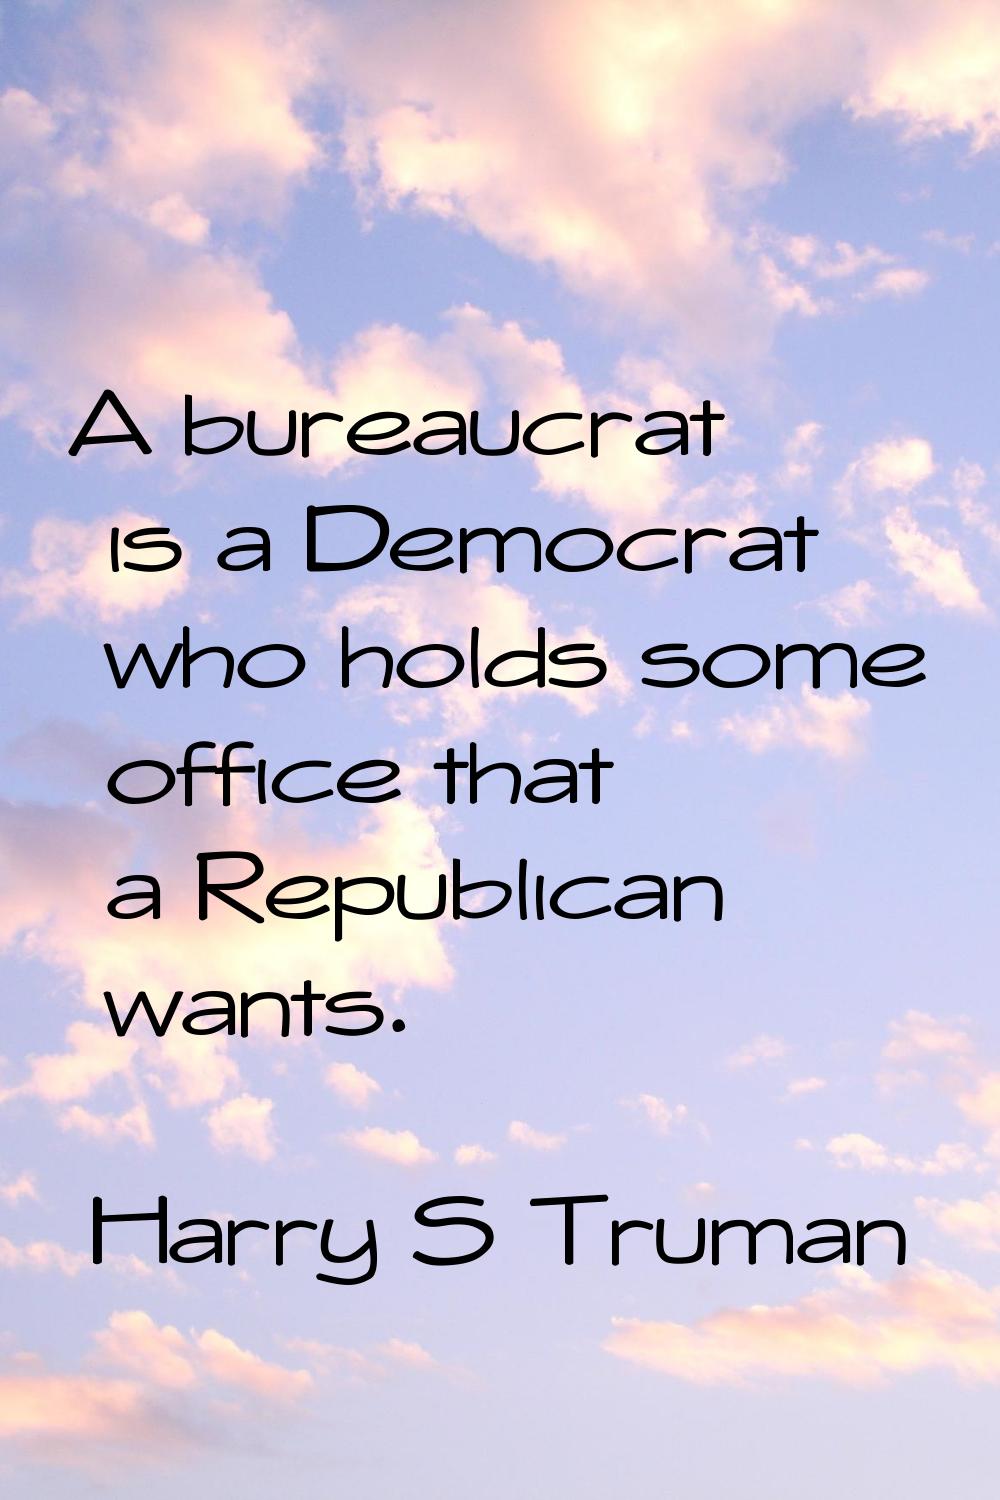 A bureaucrat is a Democrat who holds some office that a Republican wants.